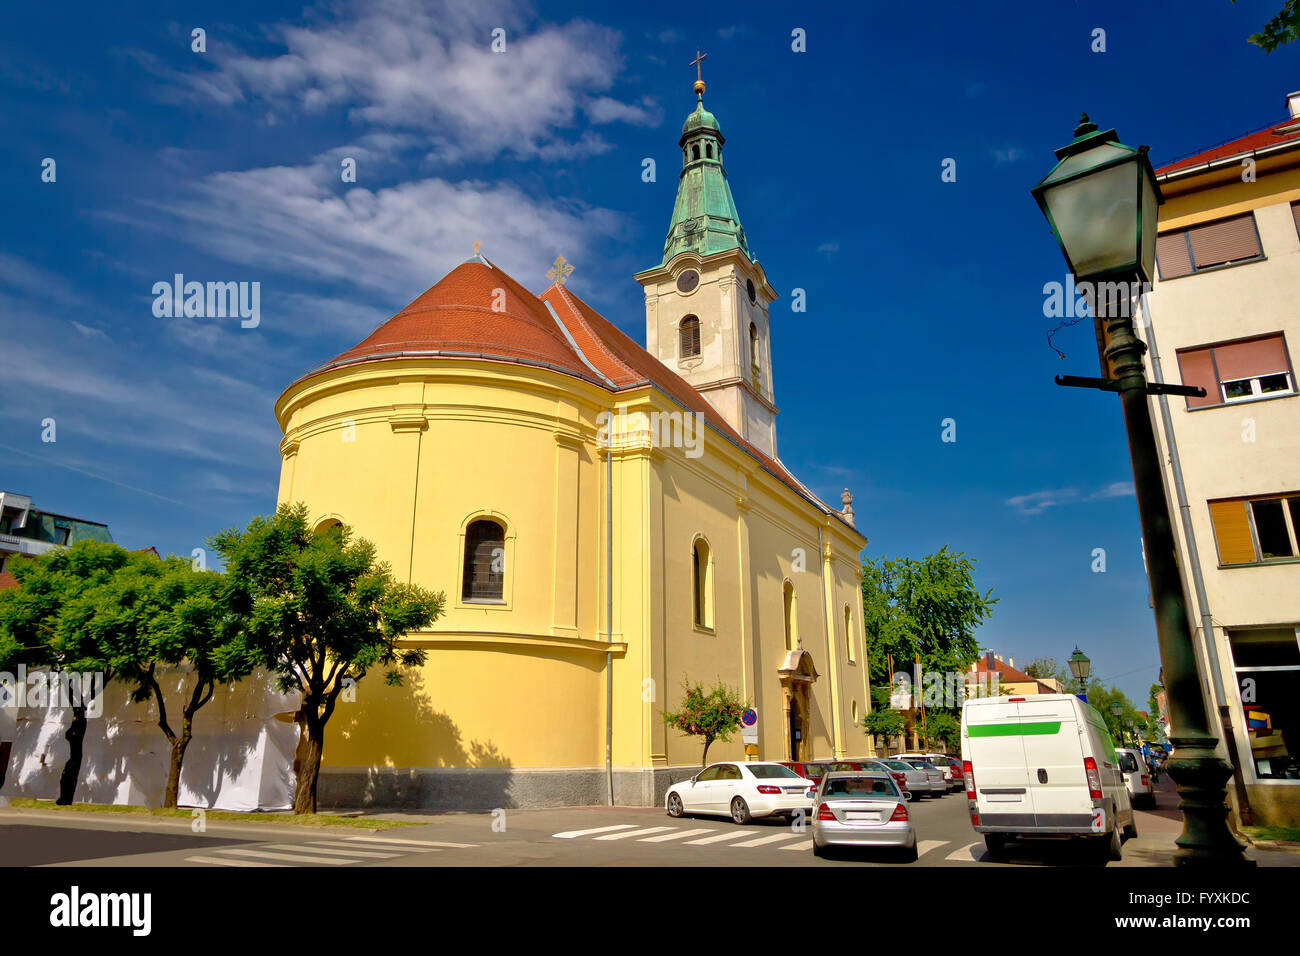 Town of Bjelovar square and church Stock Photo